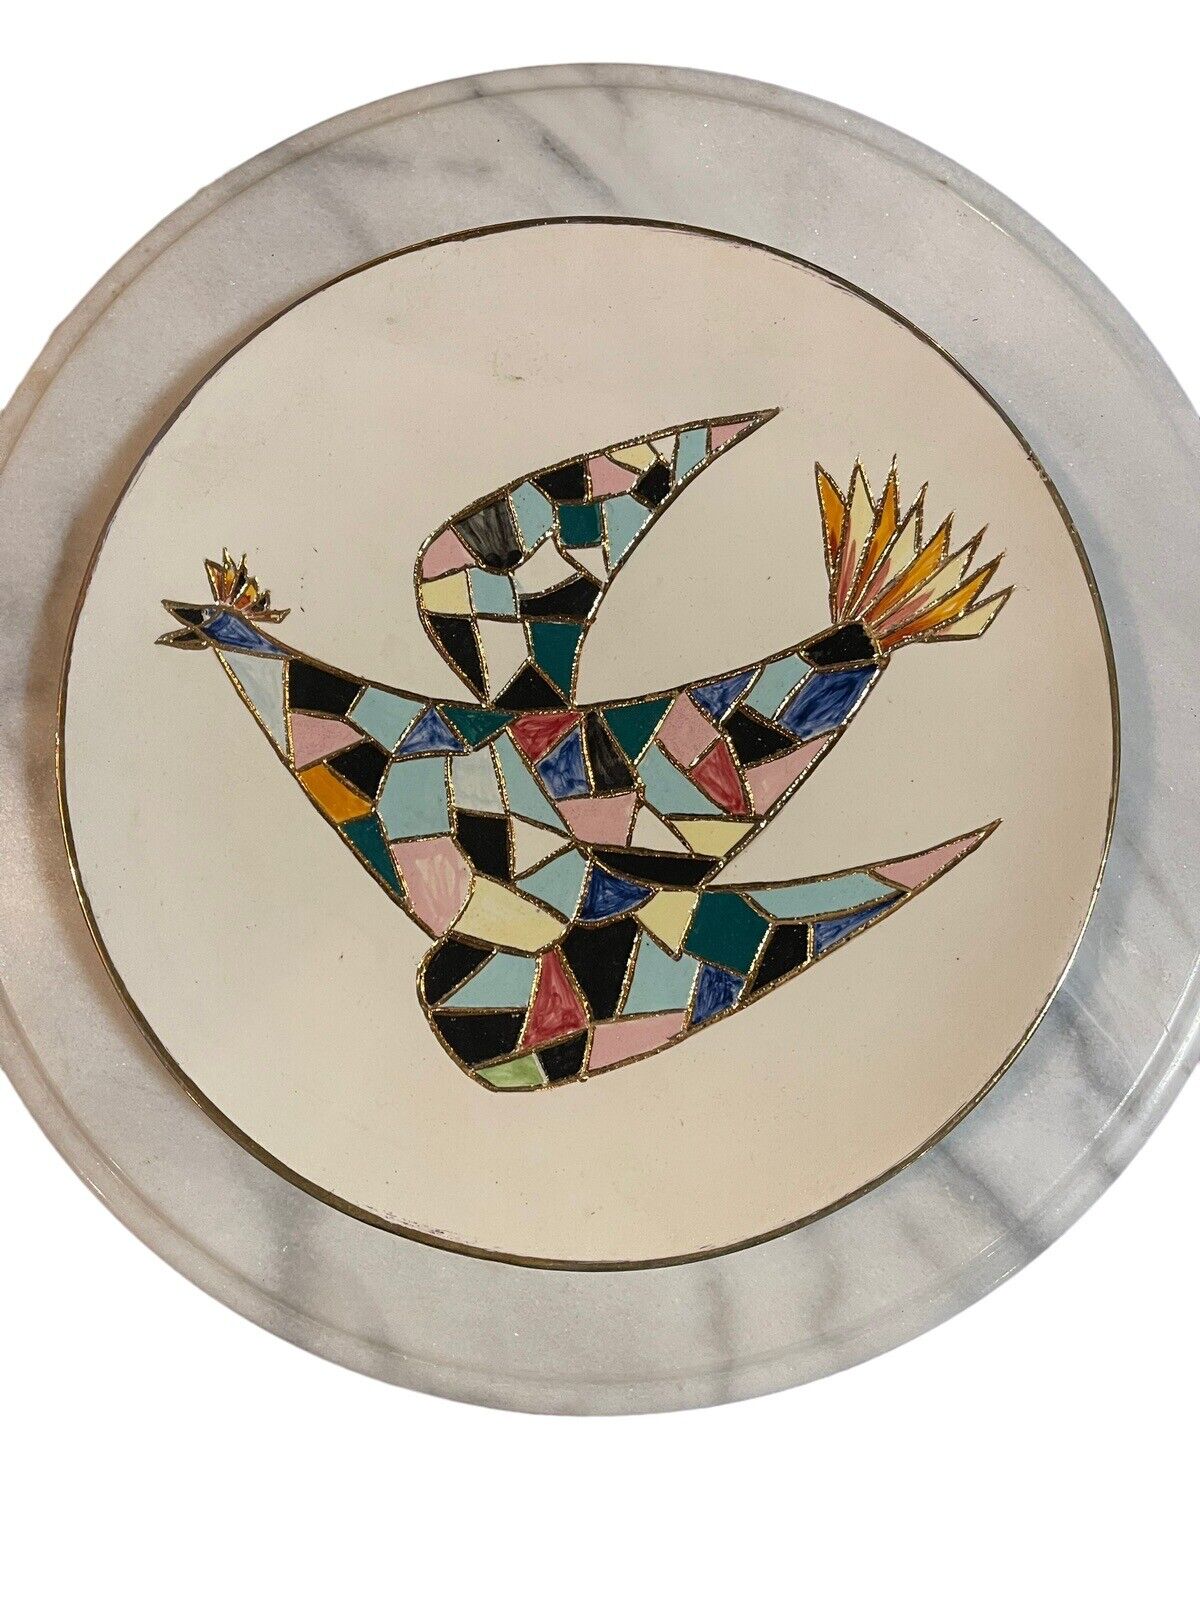 Vintage Sherry-Mike Adele Ceramic Plate Bird Dia. 8.25” Hand Made In Maine